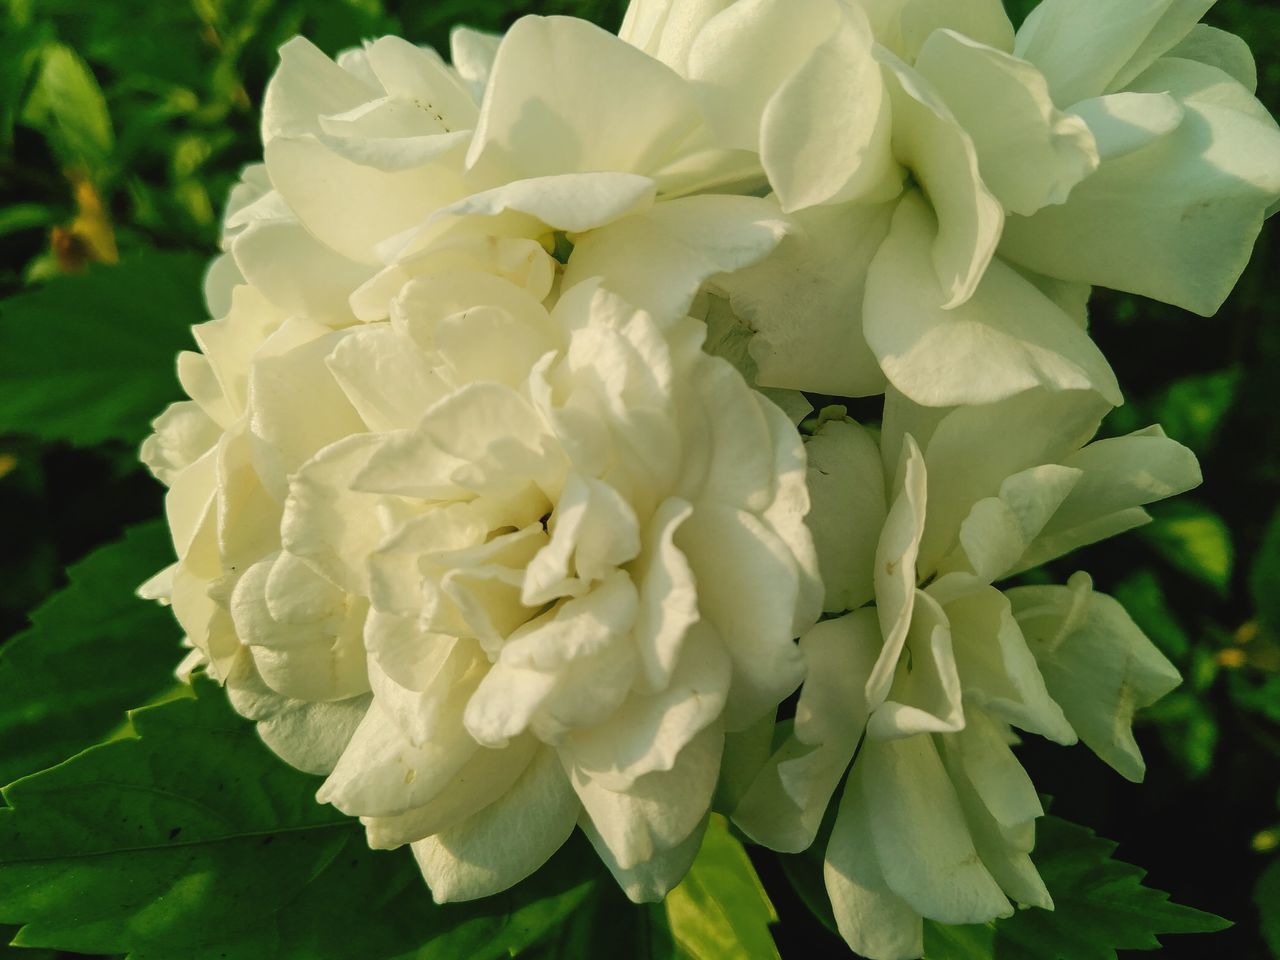 CLOSE-UP OF WHITE ROSE PLANT